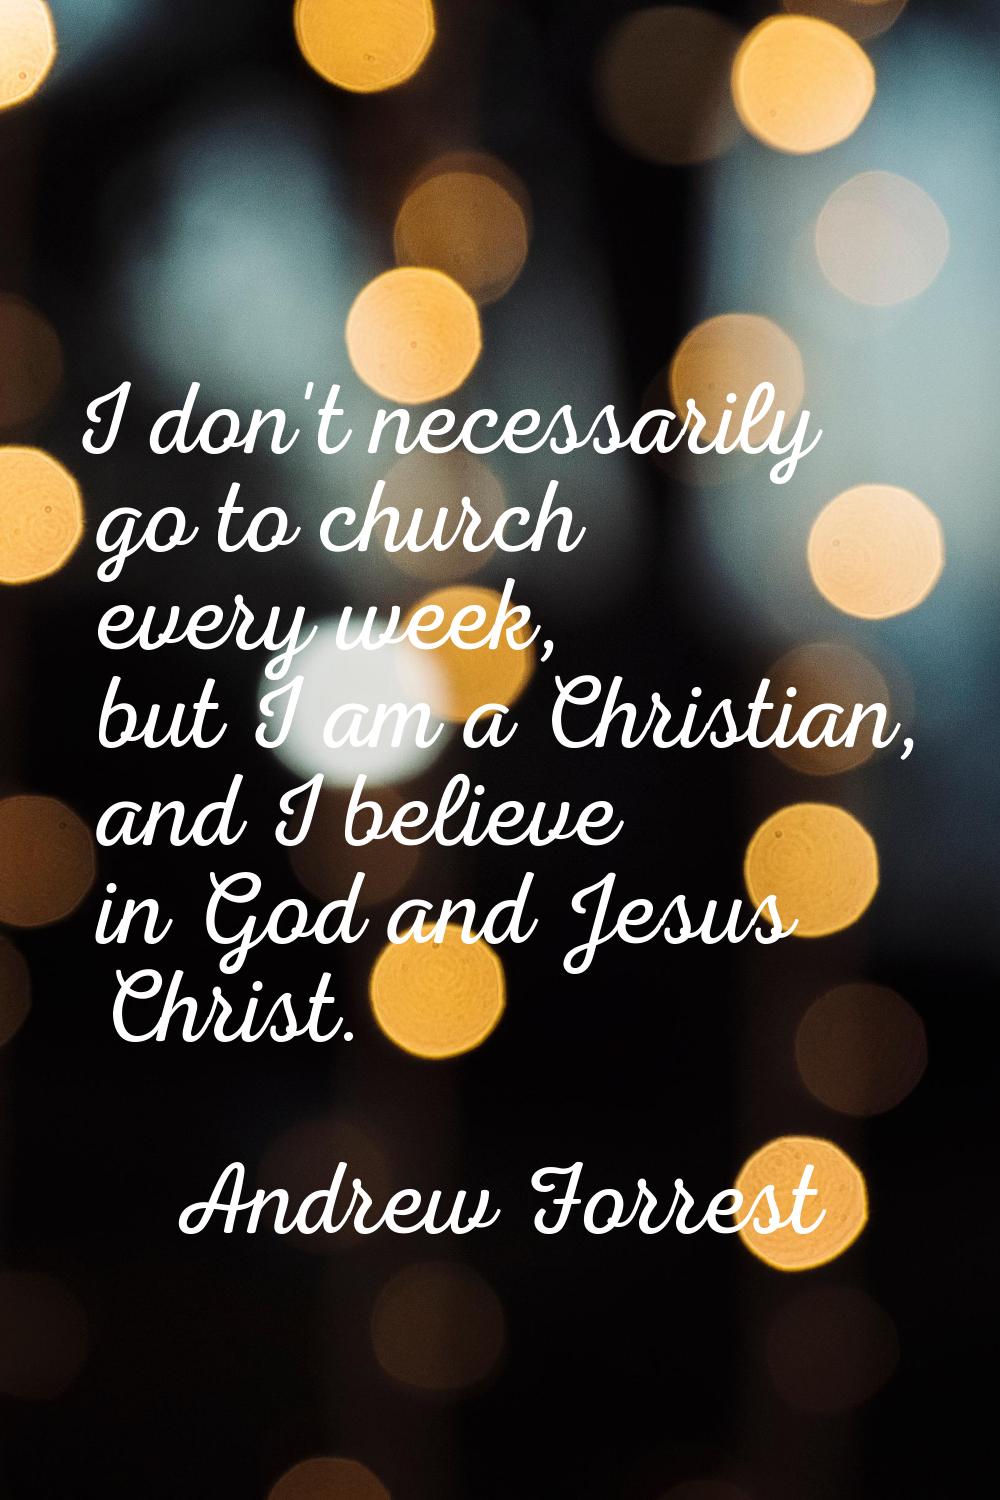 I don't necessarily go to church every week, but I am a Christian, and I believe in God and Jesus C